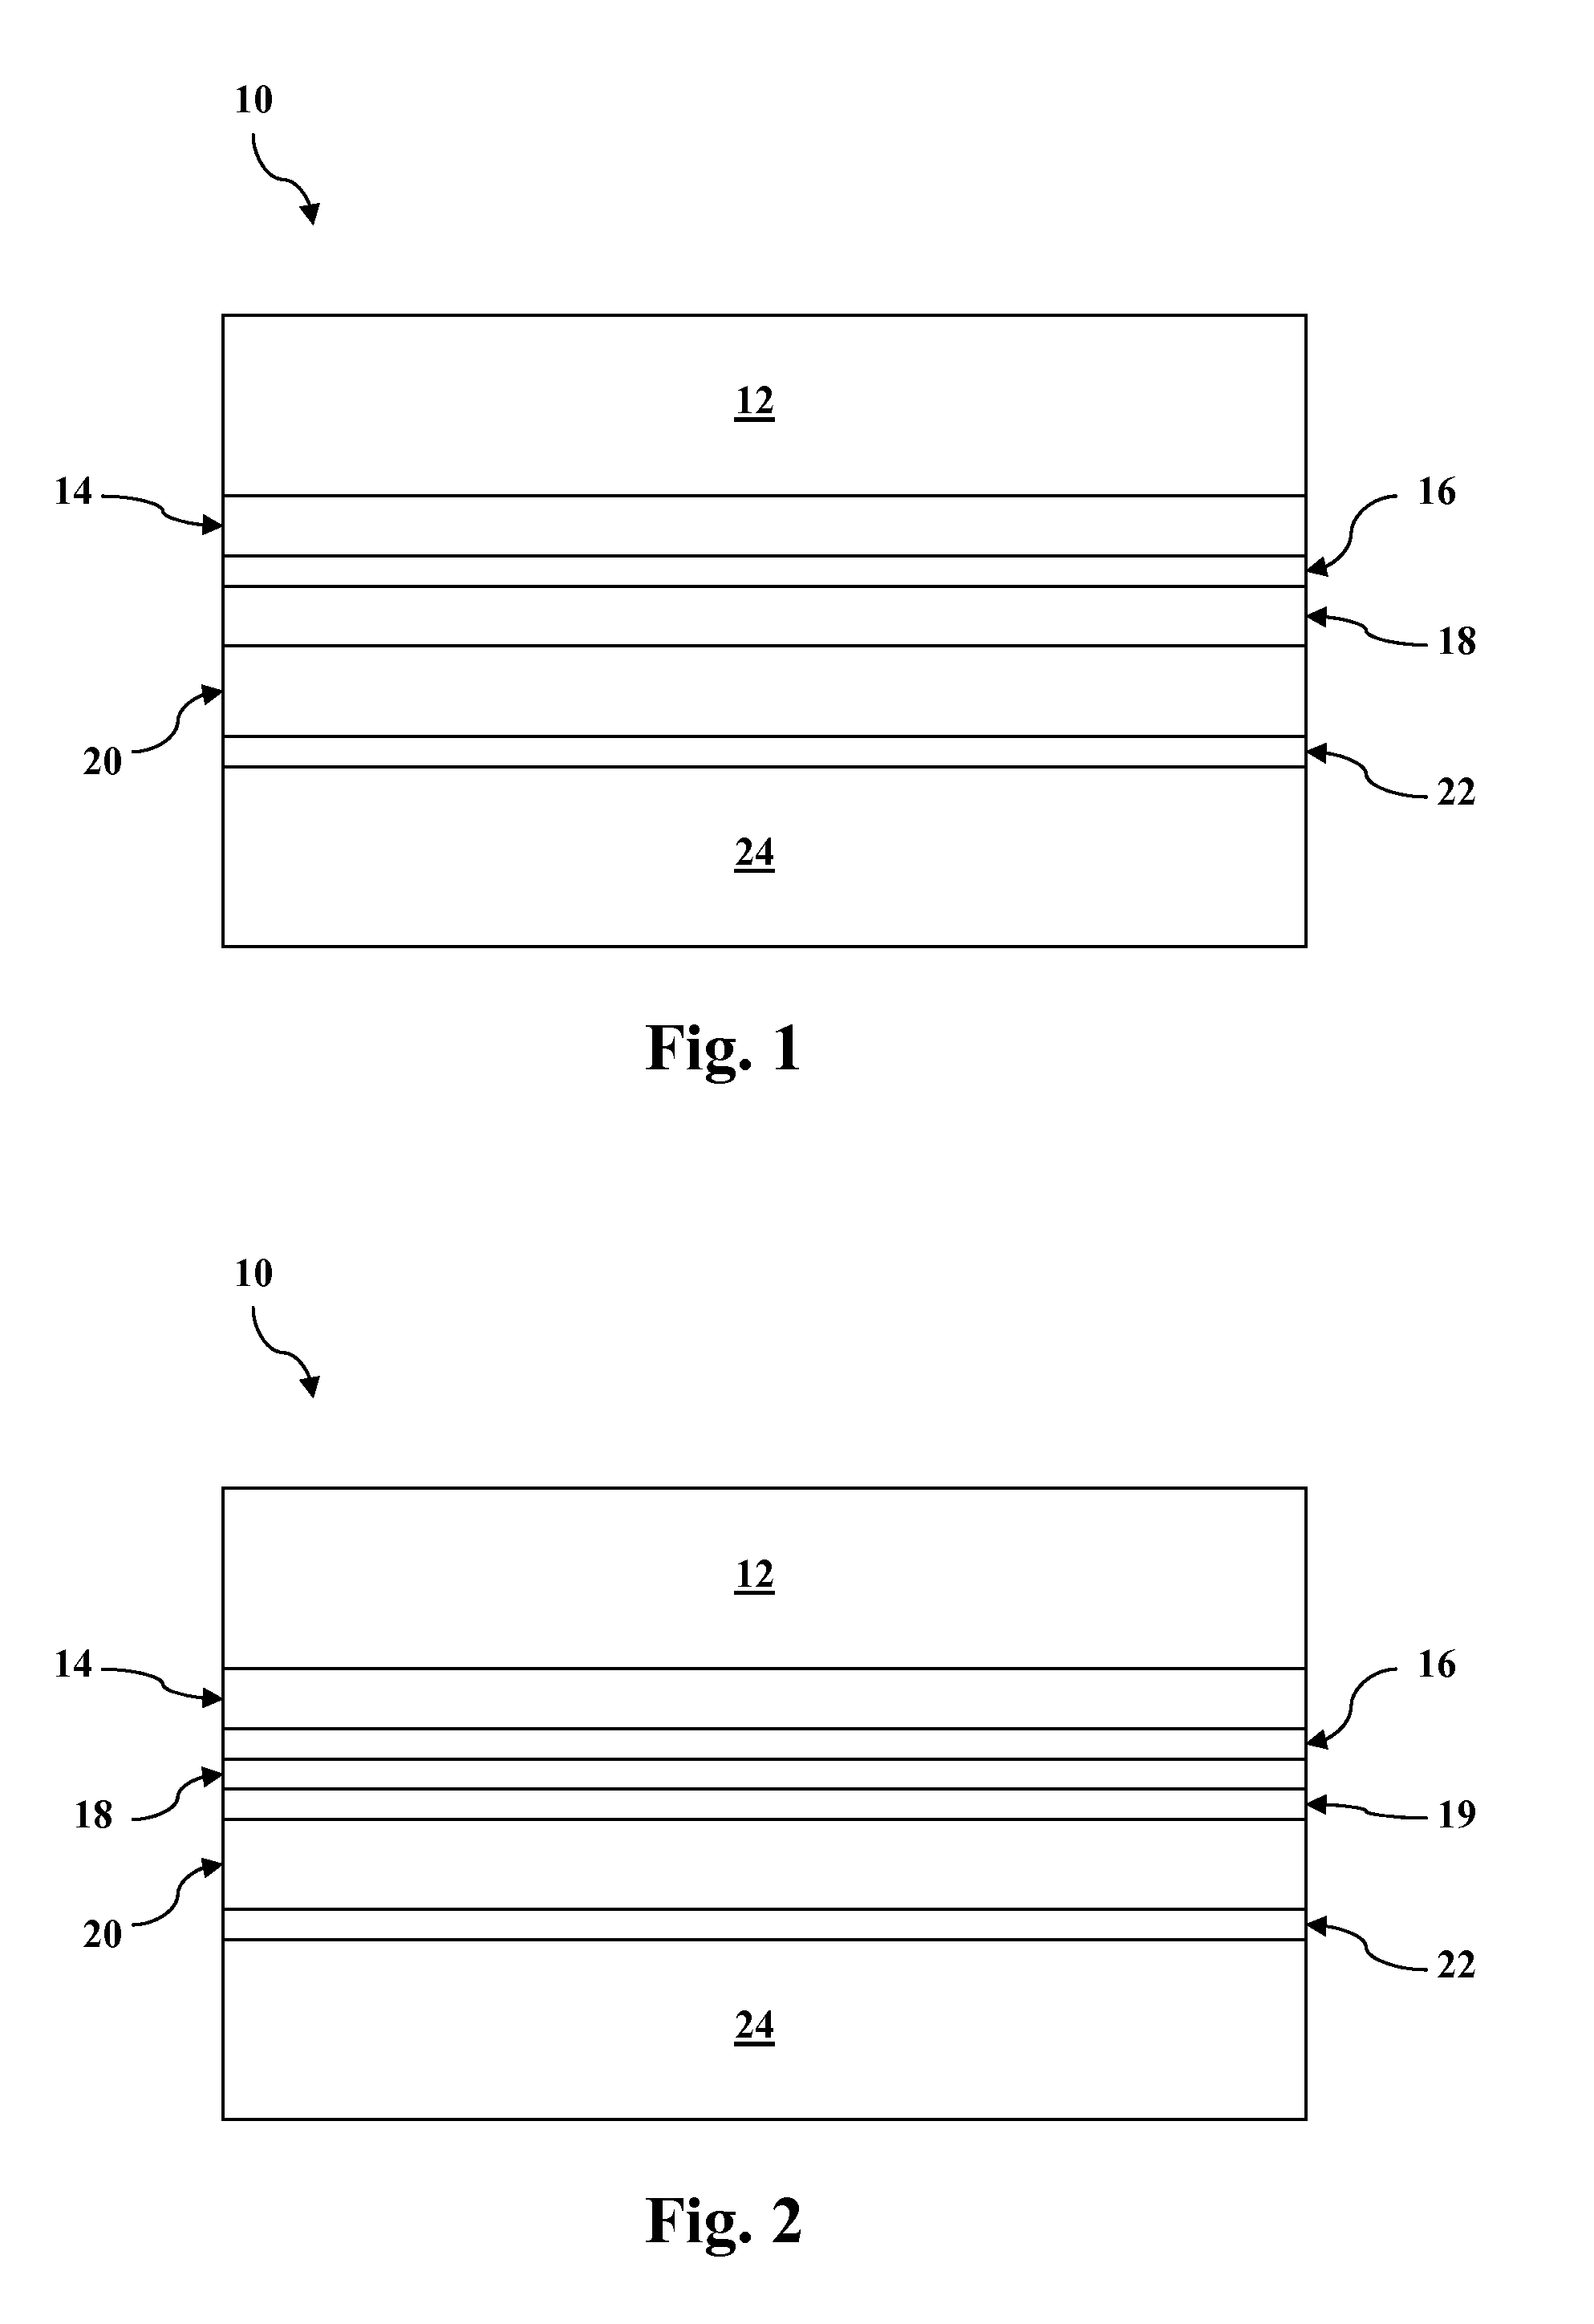 Cadmium sulfide layers for use in cadmium telluride based thin film photovoltaic devices and methods of their manufacture